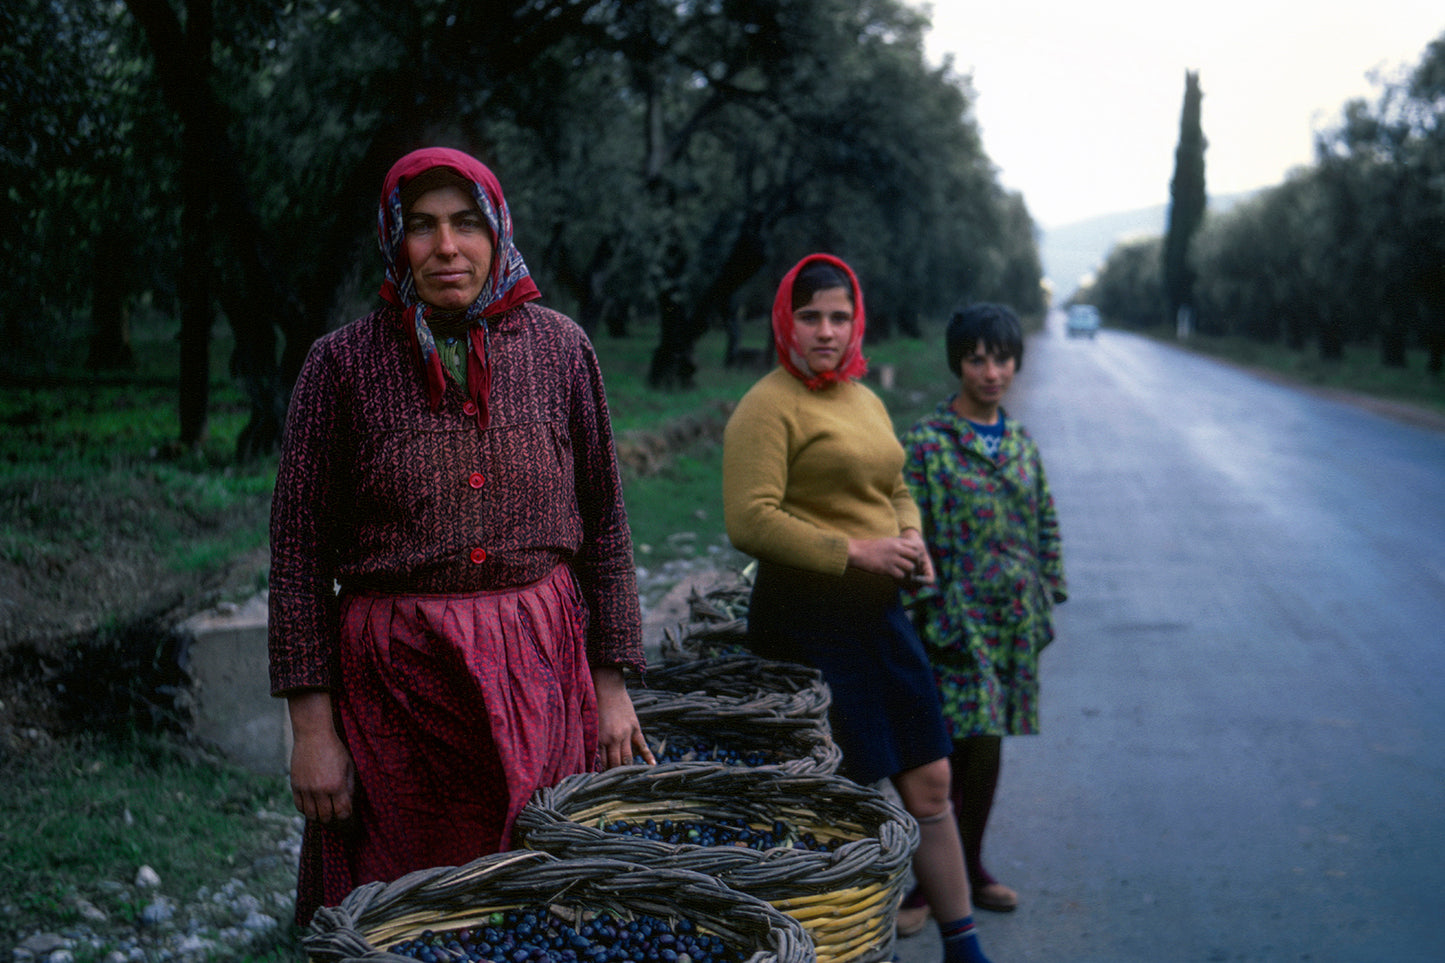 Villagers with their baskets full in Amfissa